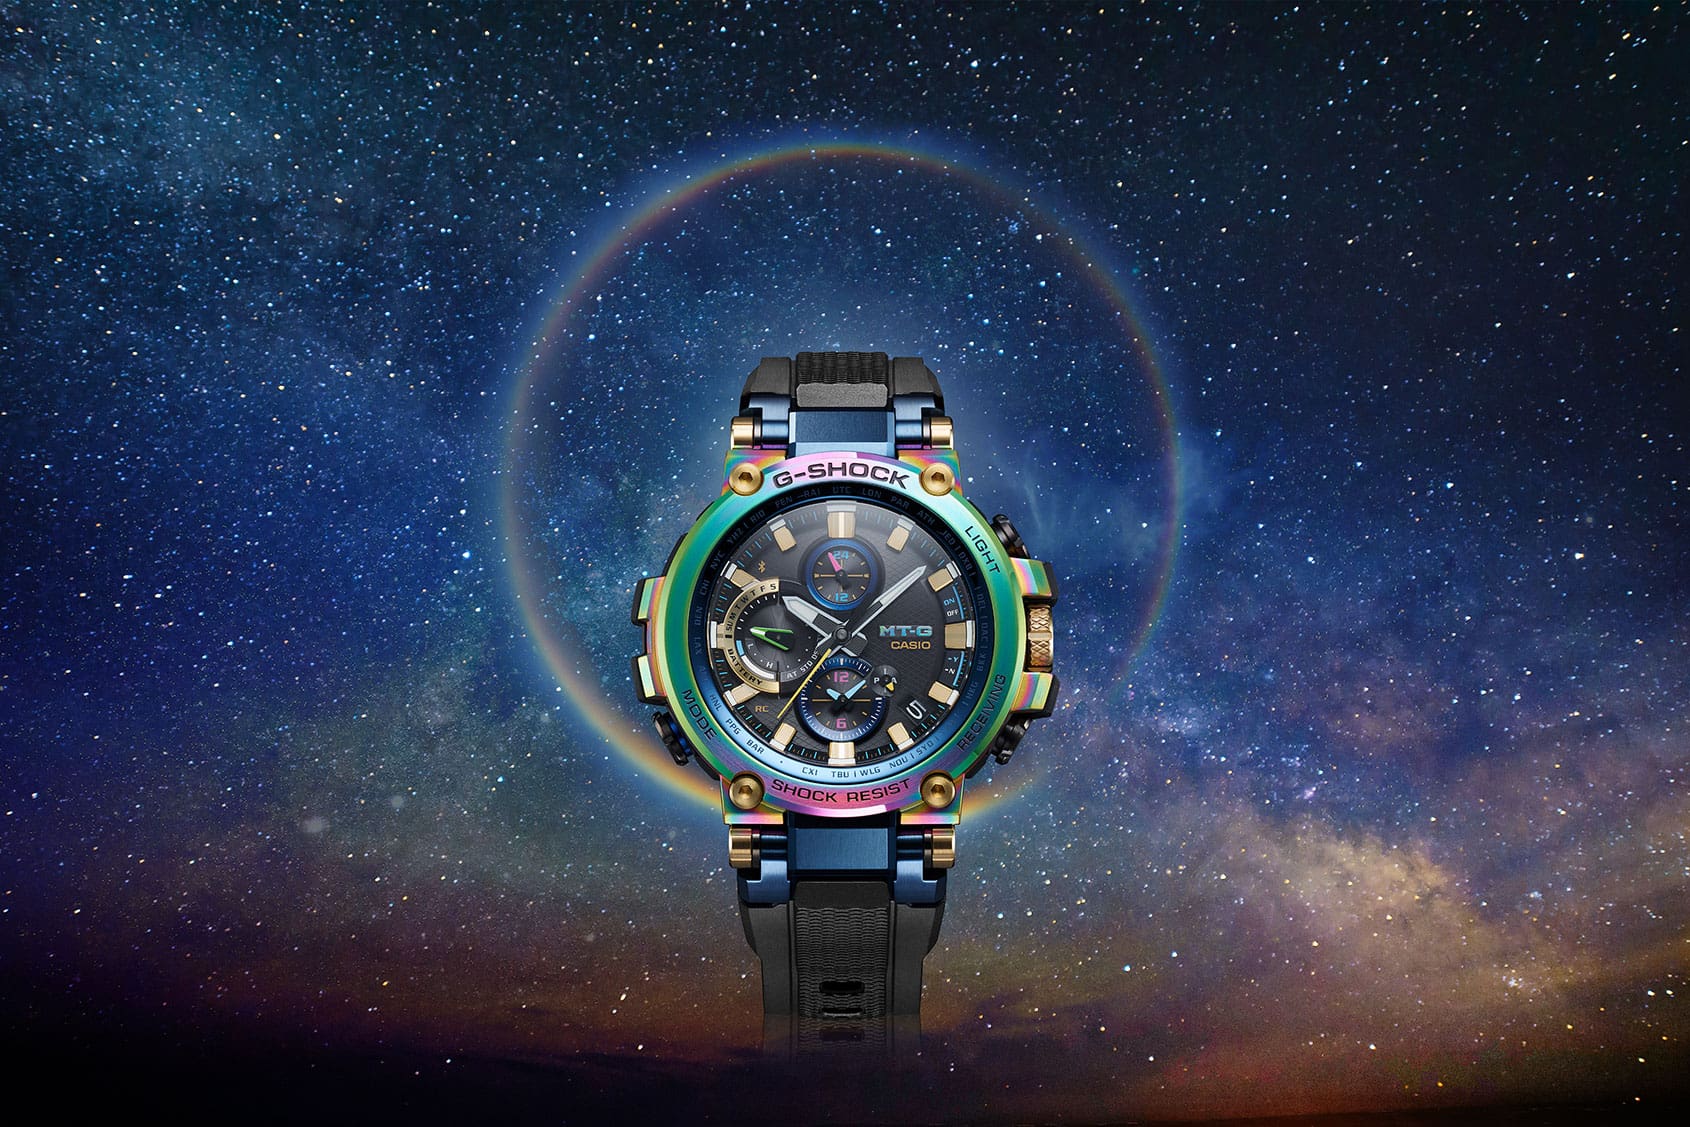 INTRODUCING: Casio’s MTG-B1000RB is somewhere way over the rainbow